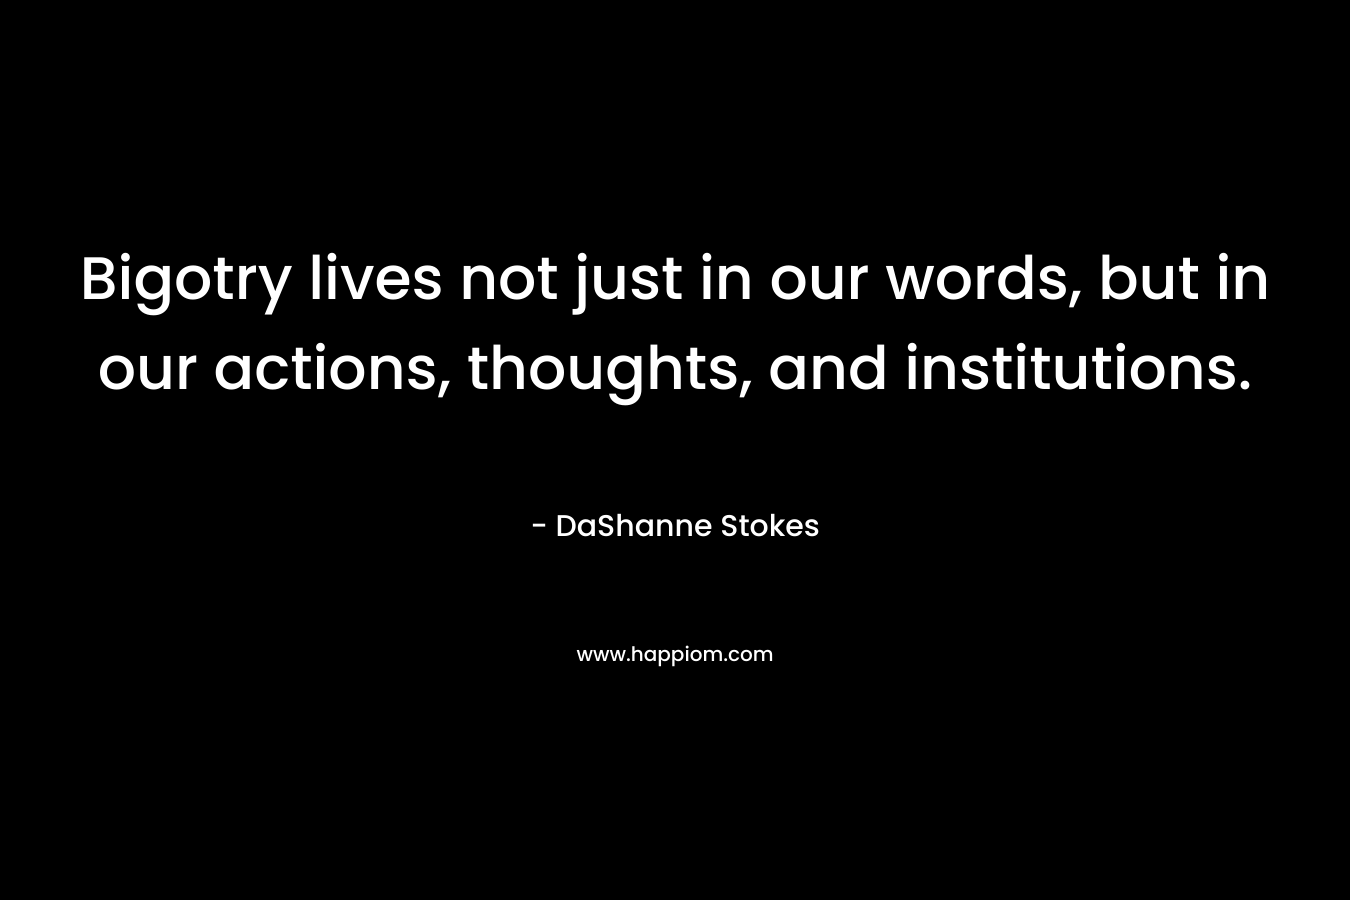 Bigotry lives not just in our words, but in our actions, thoughts, and institutions.